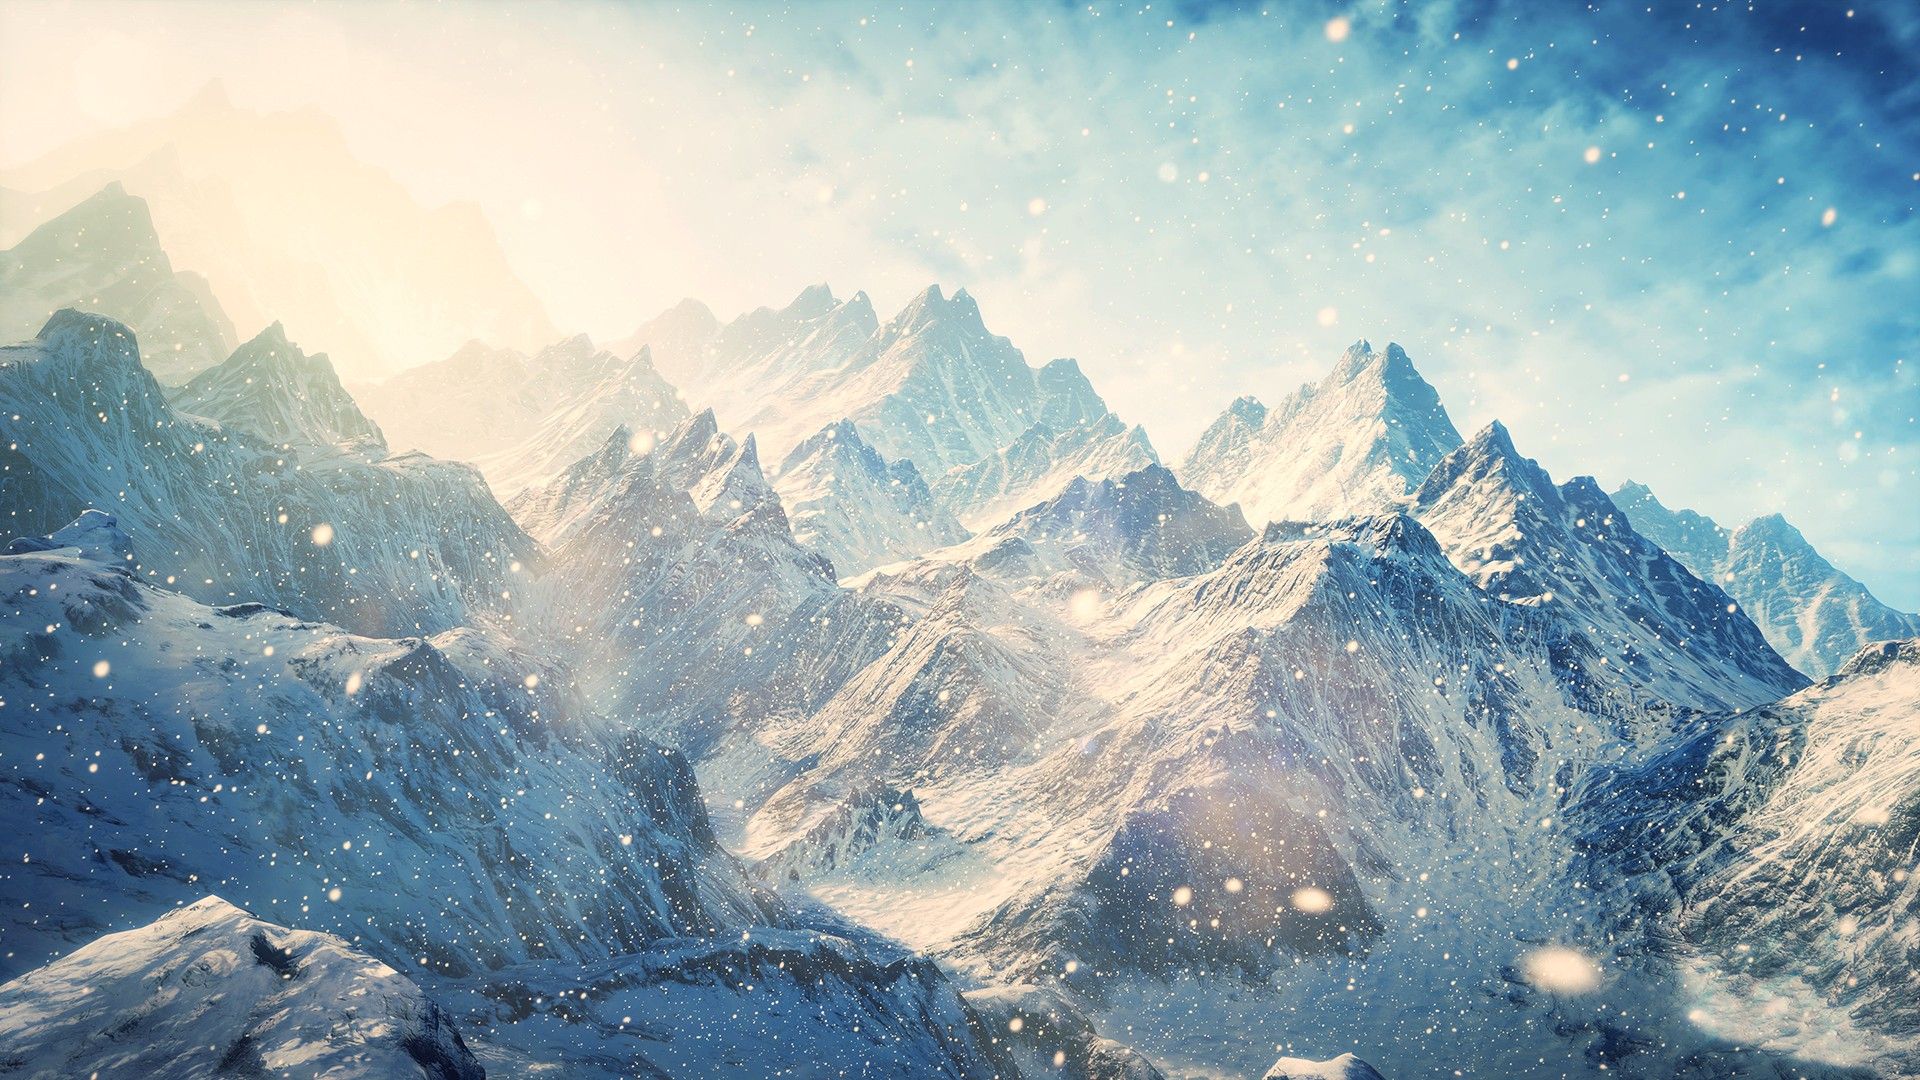 Mountains With Snow HD Wallpaper FullHDwpp Full